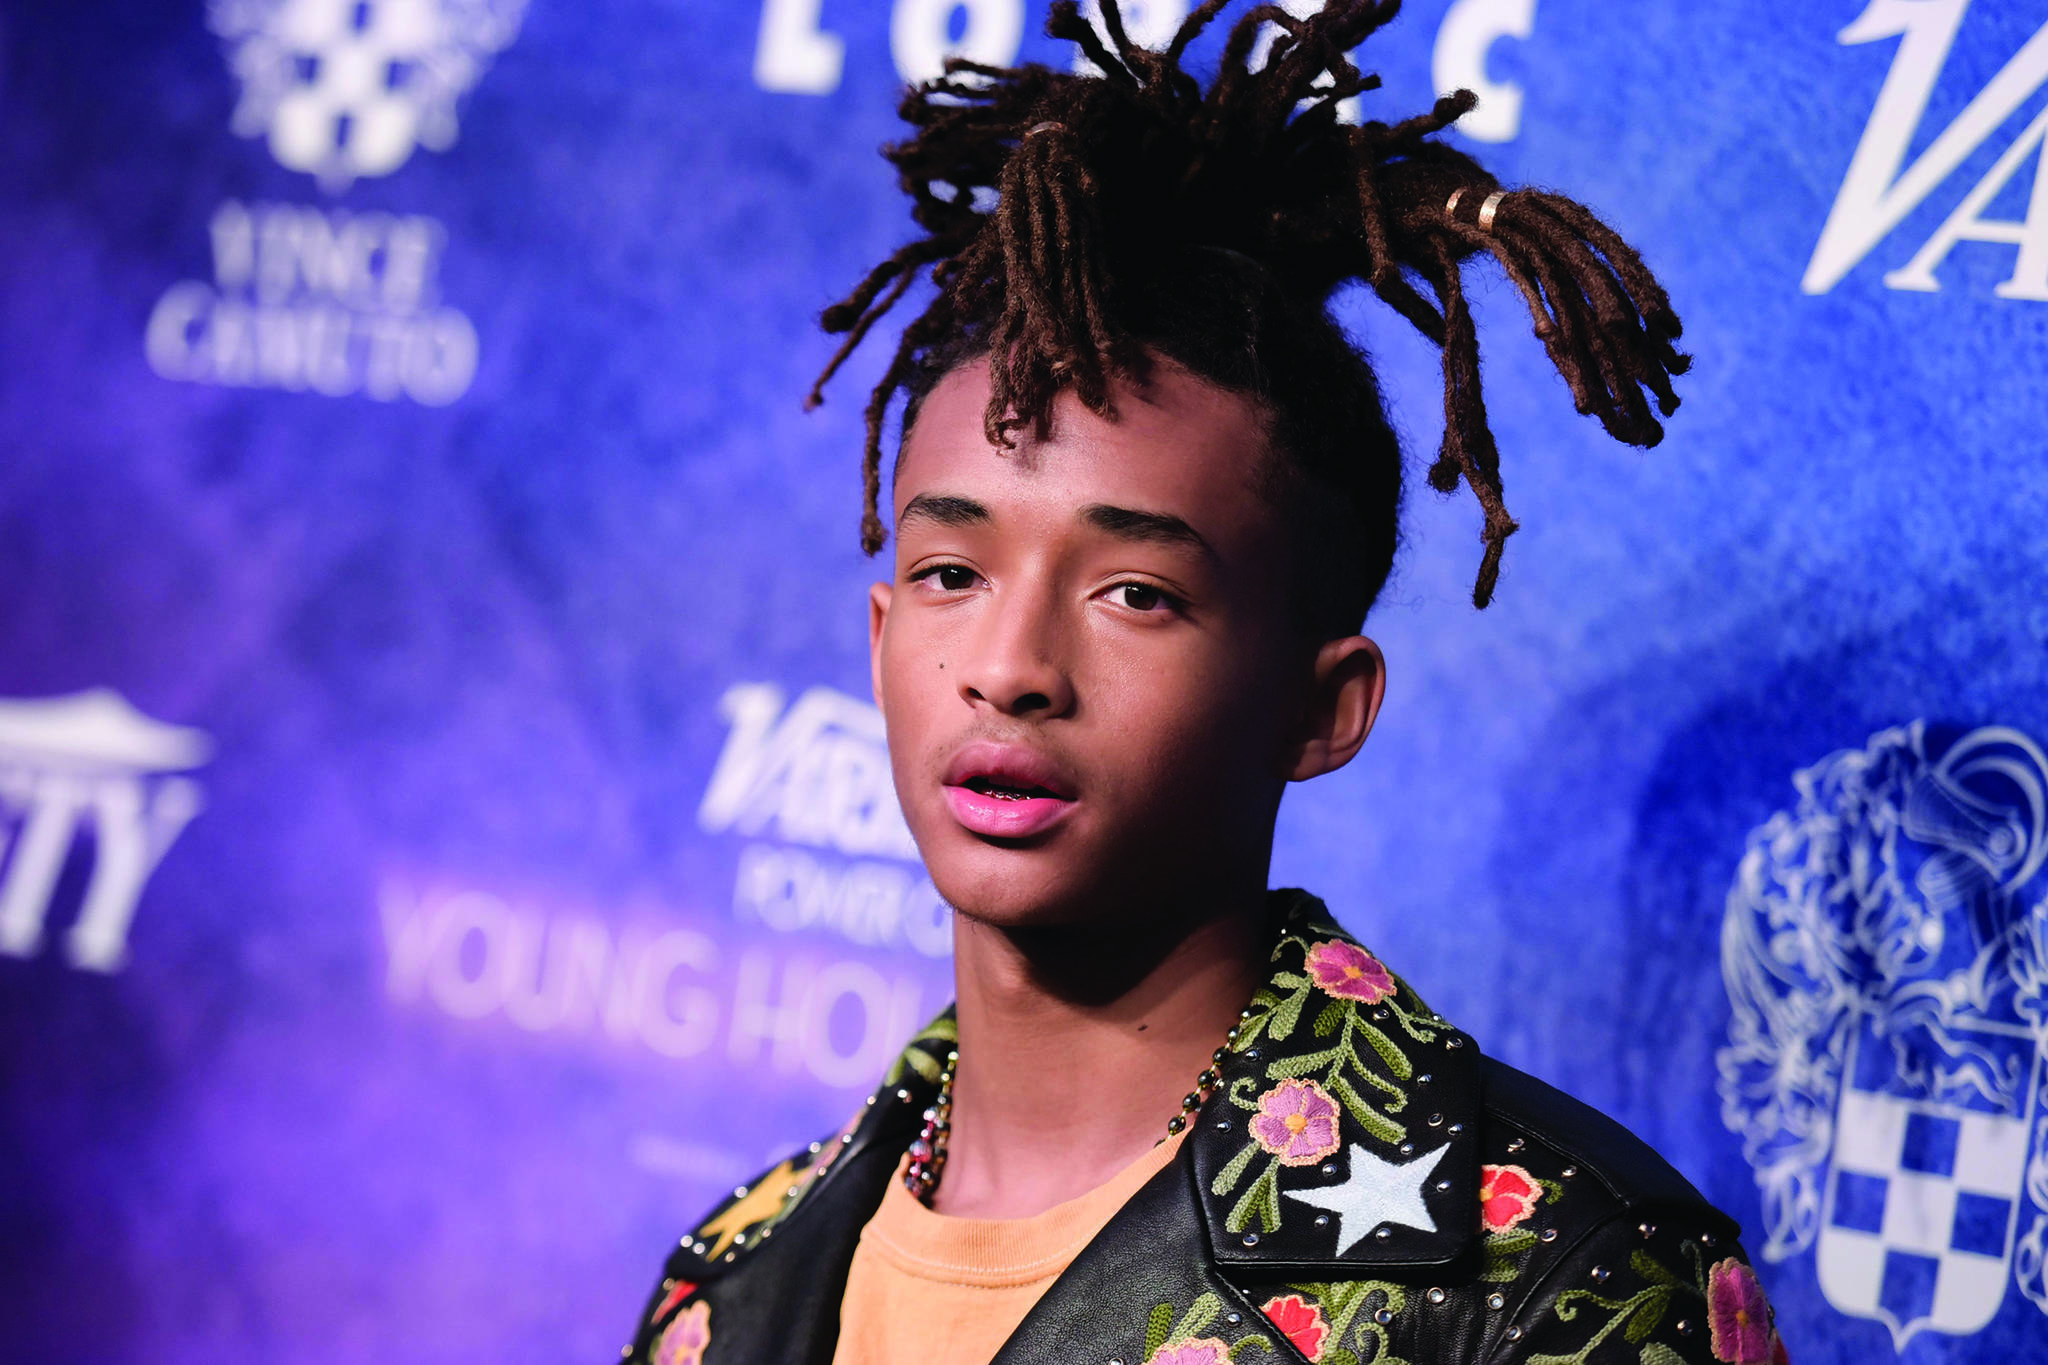 Jaden Smith attends Variety’s Power of Young Hollywood event at NeueHouse Hollywood on Tuesday, Aug. 16, 2016, in Los Angeles. (Photo by Richard Shotwell/Invision/AP)